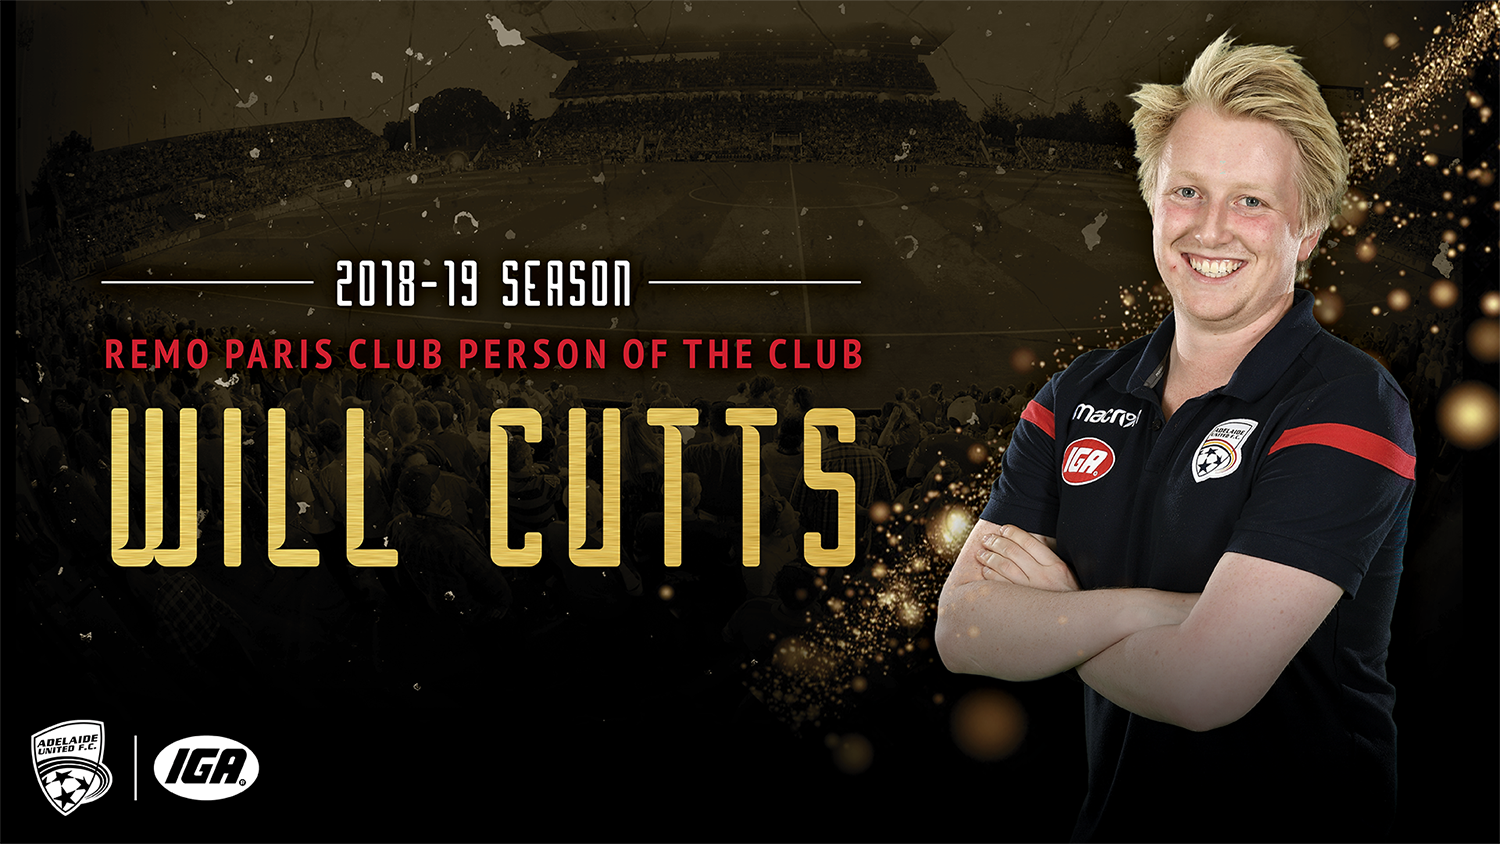 Adelaide United 2018/19 emo Paris Club Person of the Year - Will Cutts